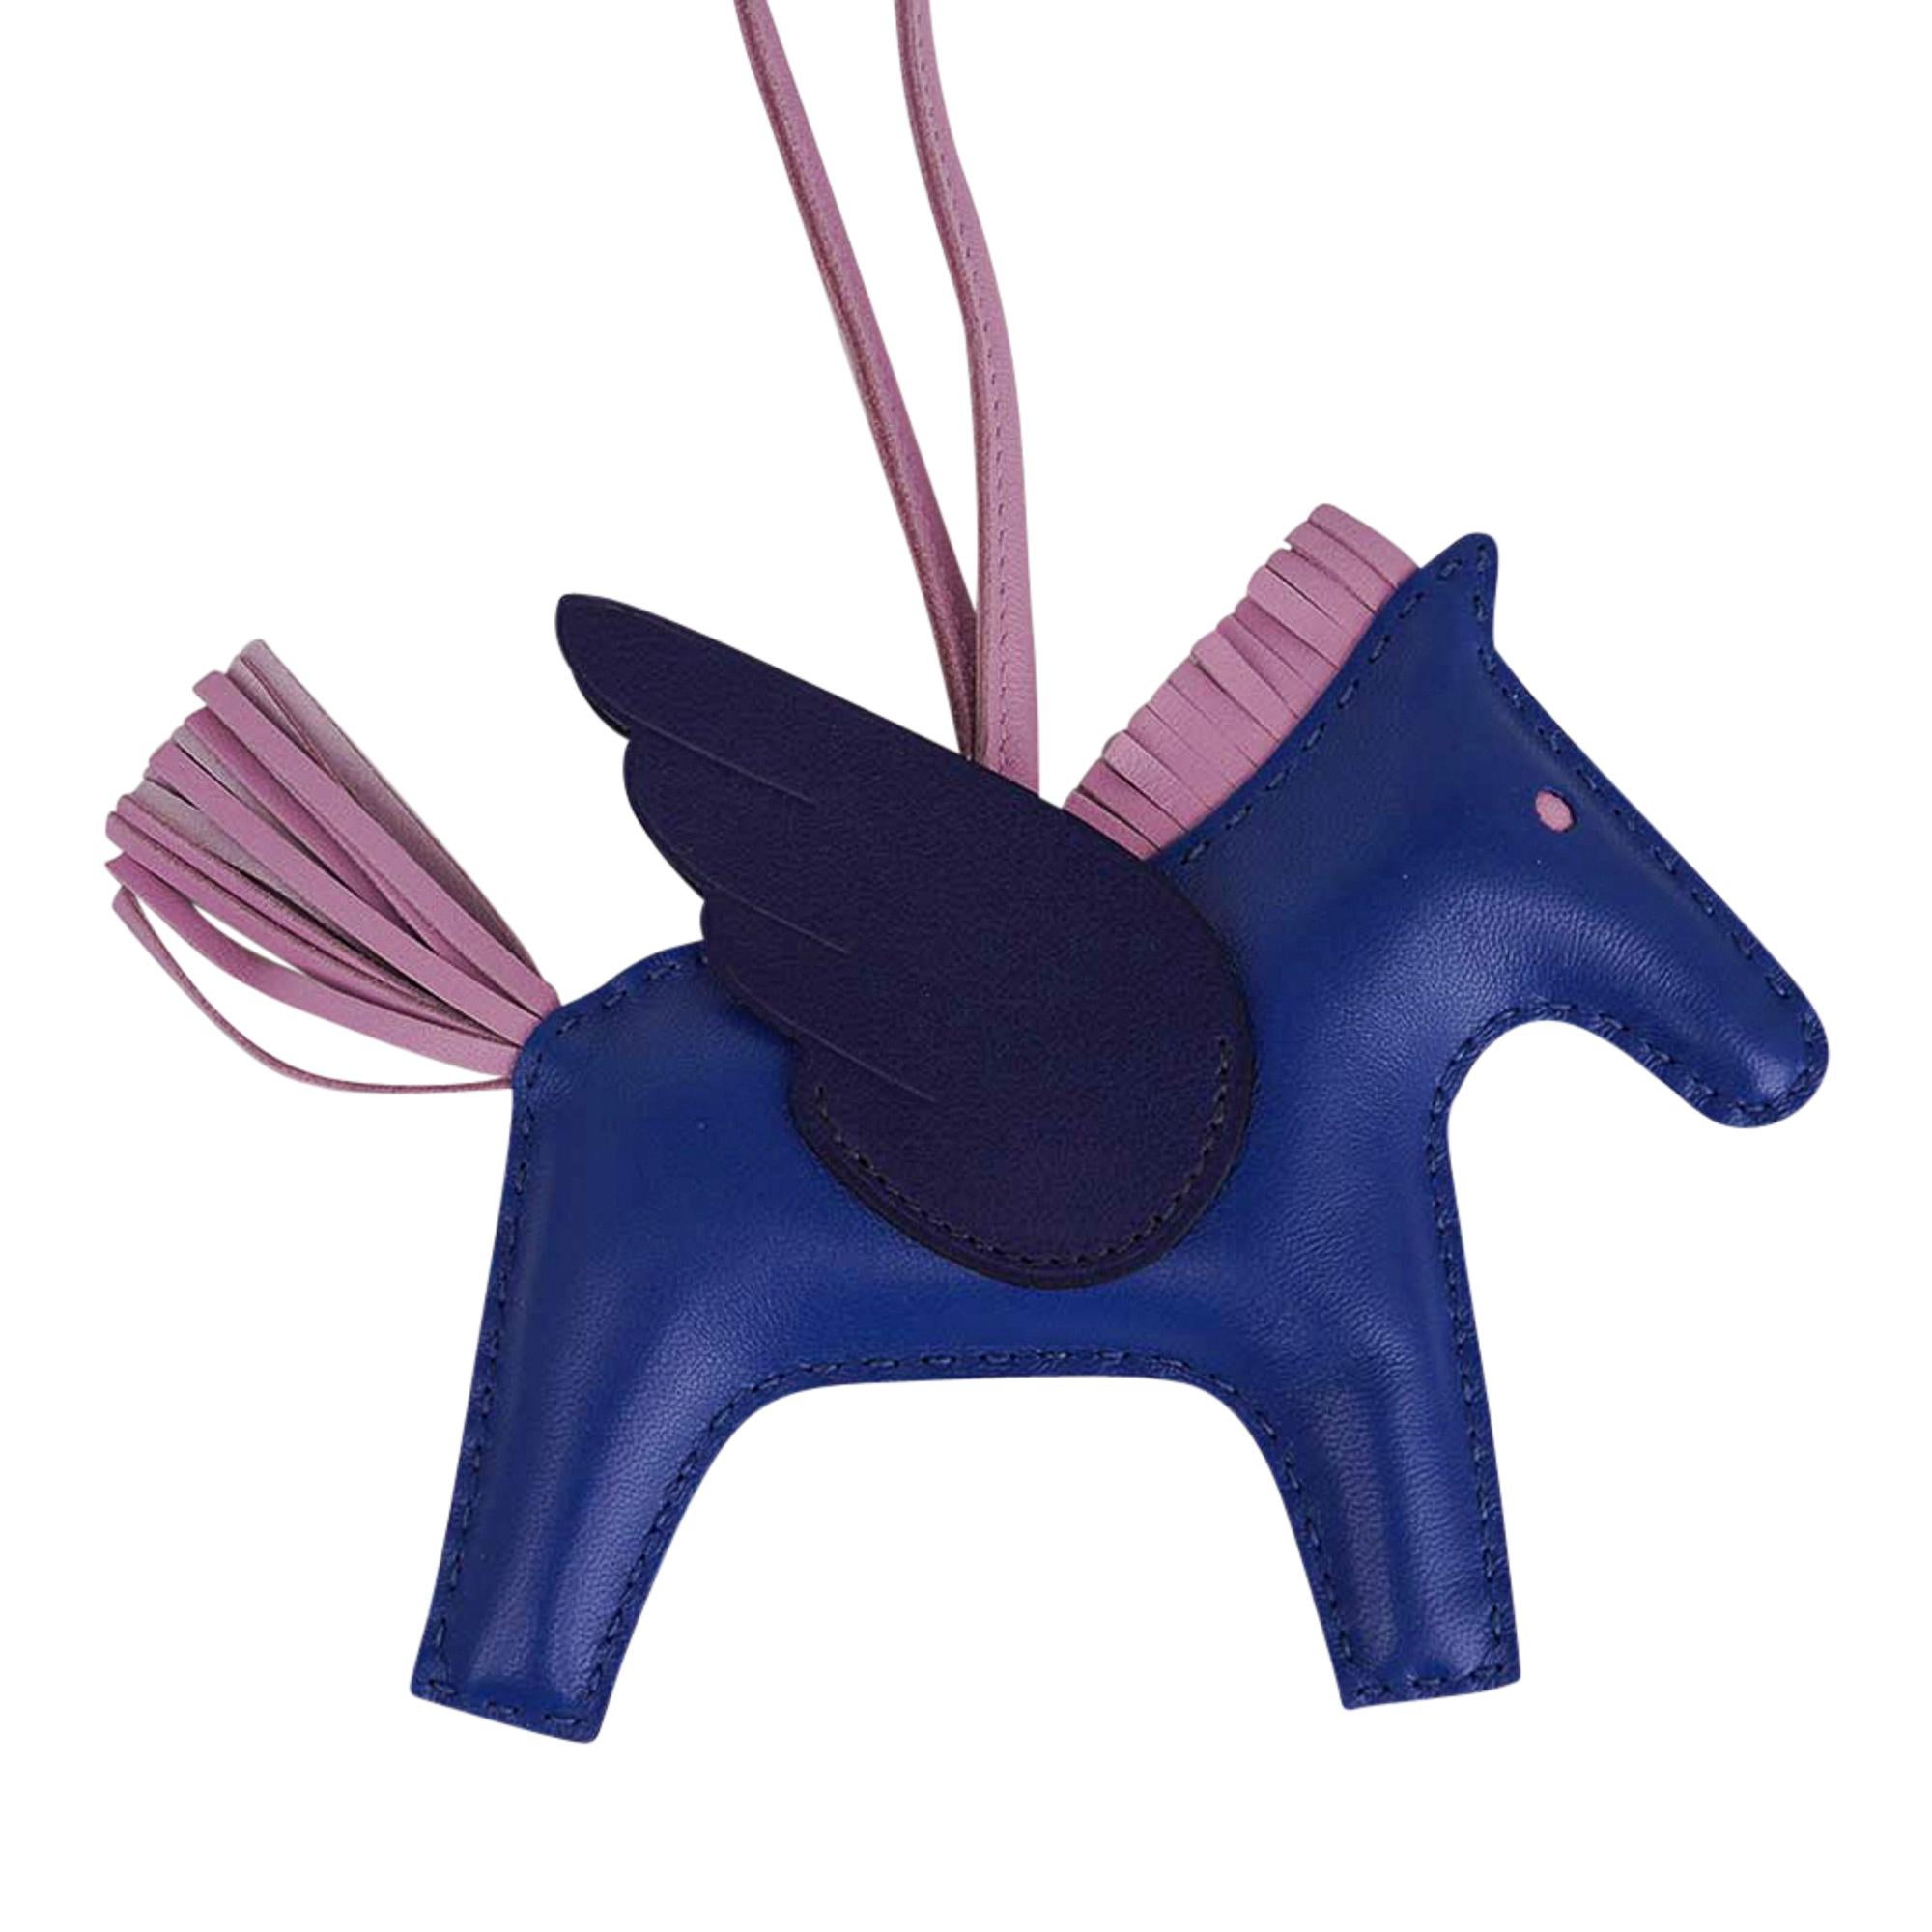 Mightychic offers an Hermes Grigri Pegase Rodeo PM featured in Bleu de France 
with Mauve Sylvestre mane and tail, and Bleu Saphir wings. 
Leather is lambskin Milo.
Signature HERMES PARIS MADE IN FRANCE is stamped under saddle.
New or Pristine Store